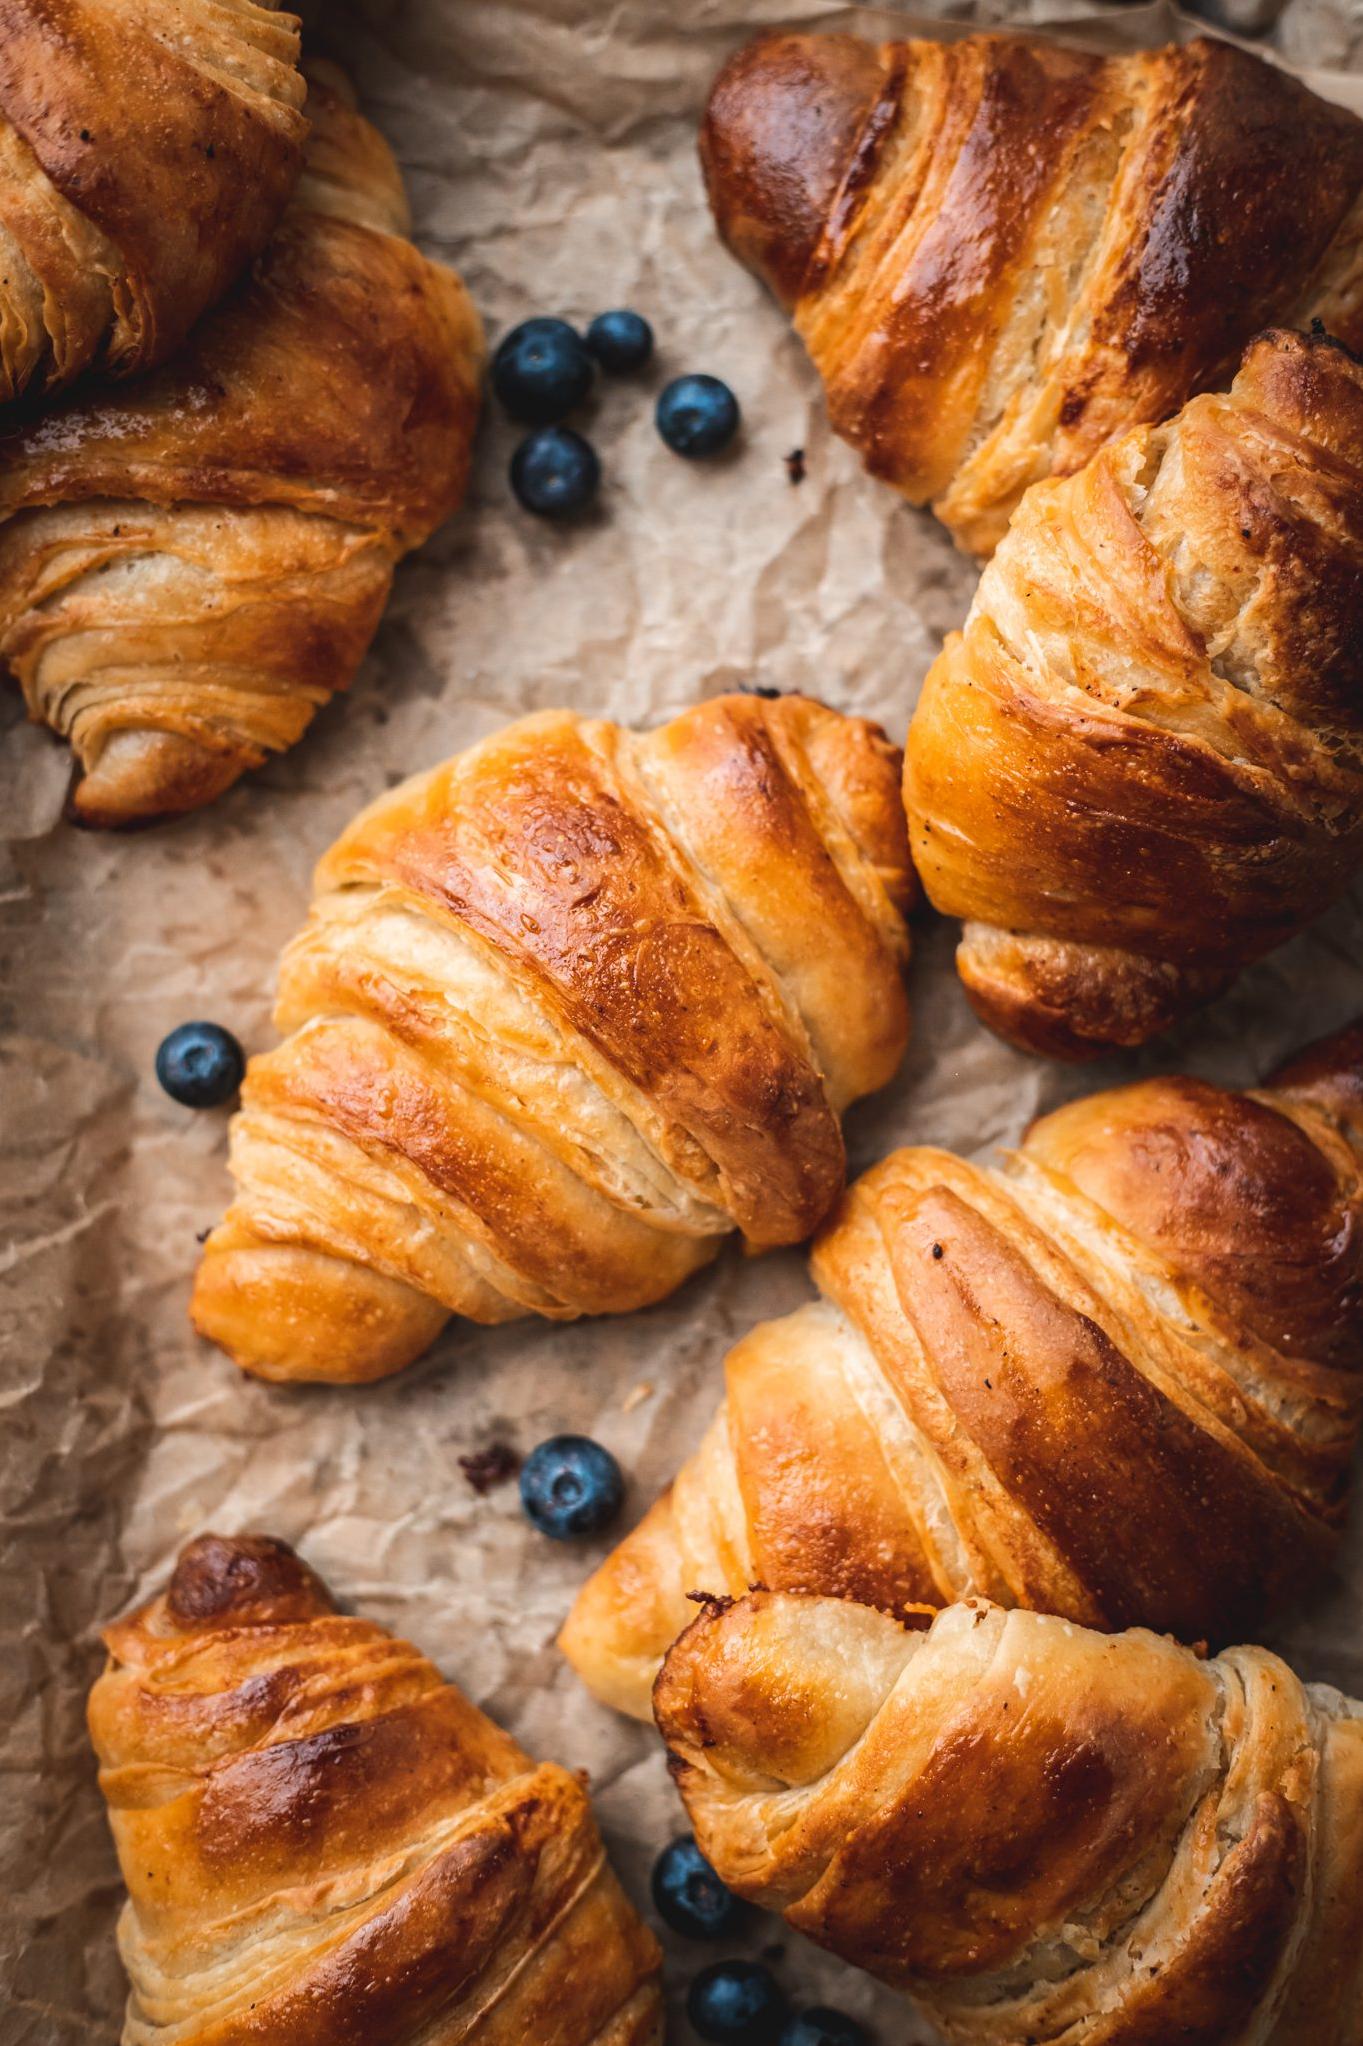  Who said you couldn't enjoy croissants as a vegan? Try this recipe!